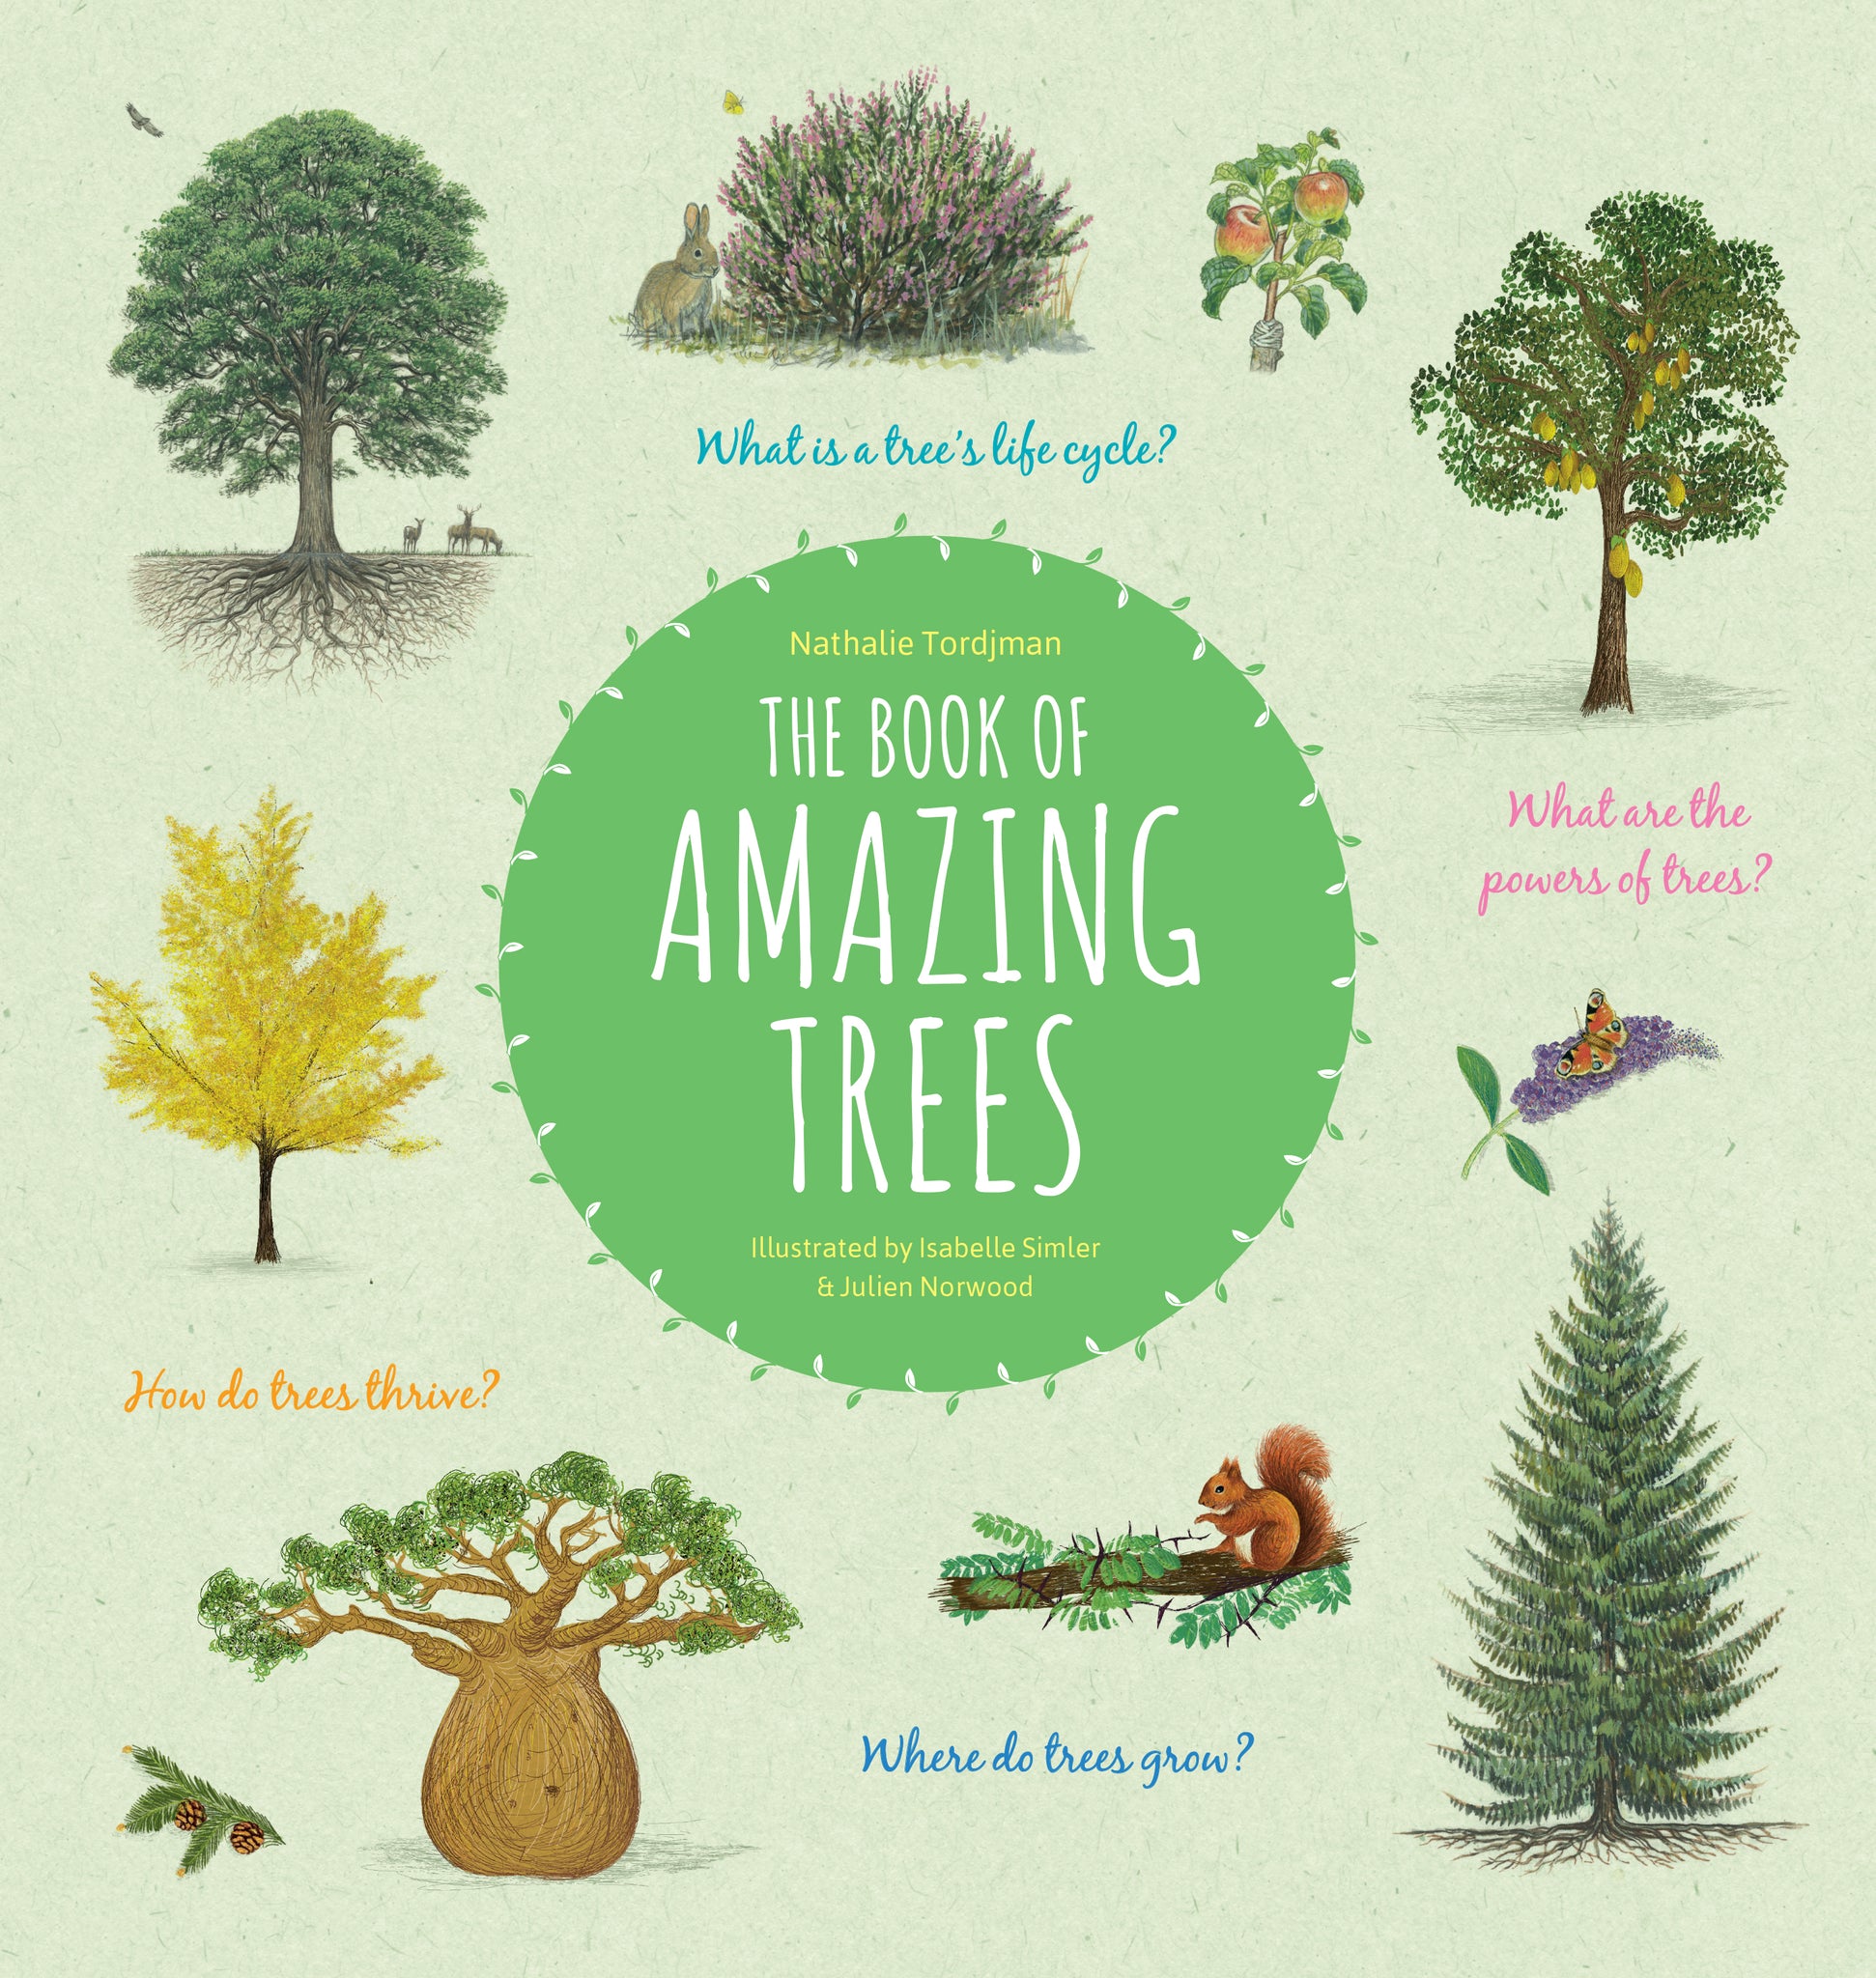 Book of Amazing Trees, the cover